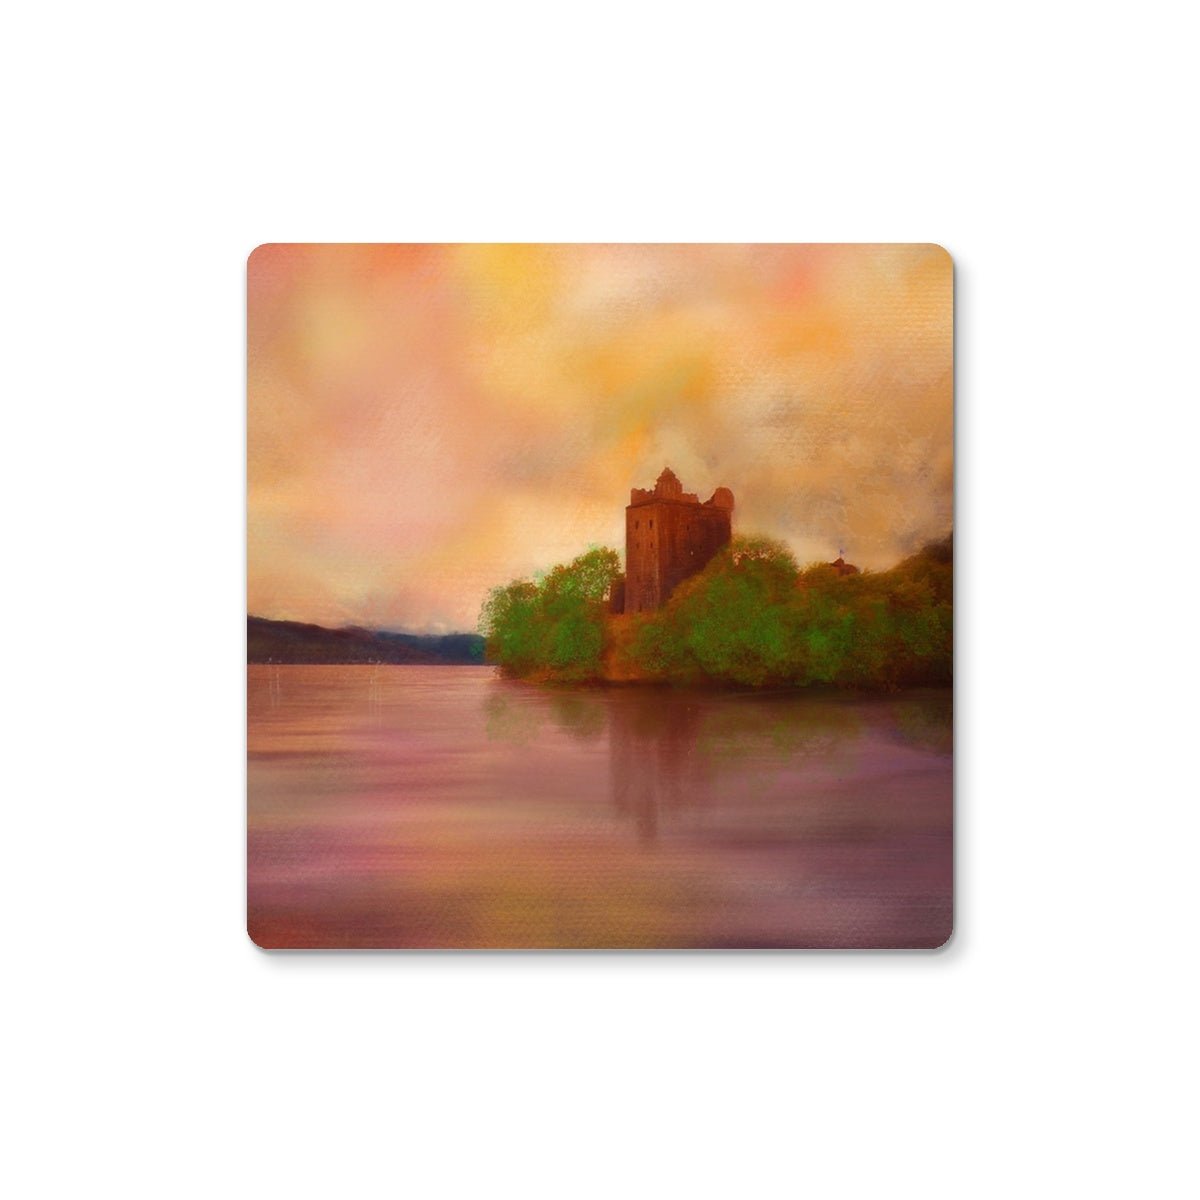 Urquhart Castle Art Gifts Coaster-Coasters-Scottish Castles Art Gallery-4 Coasters-Paintings, Prints, Homeware, Art Gifts From Scotland By Scottish Artist Kevin Hunter